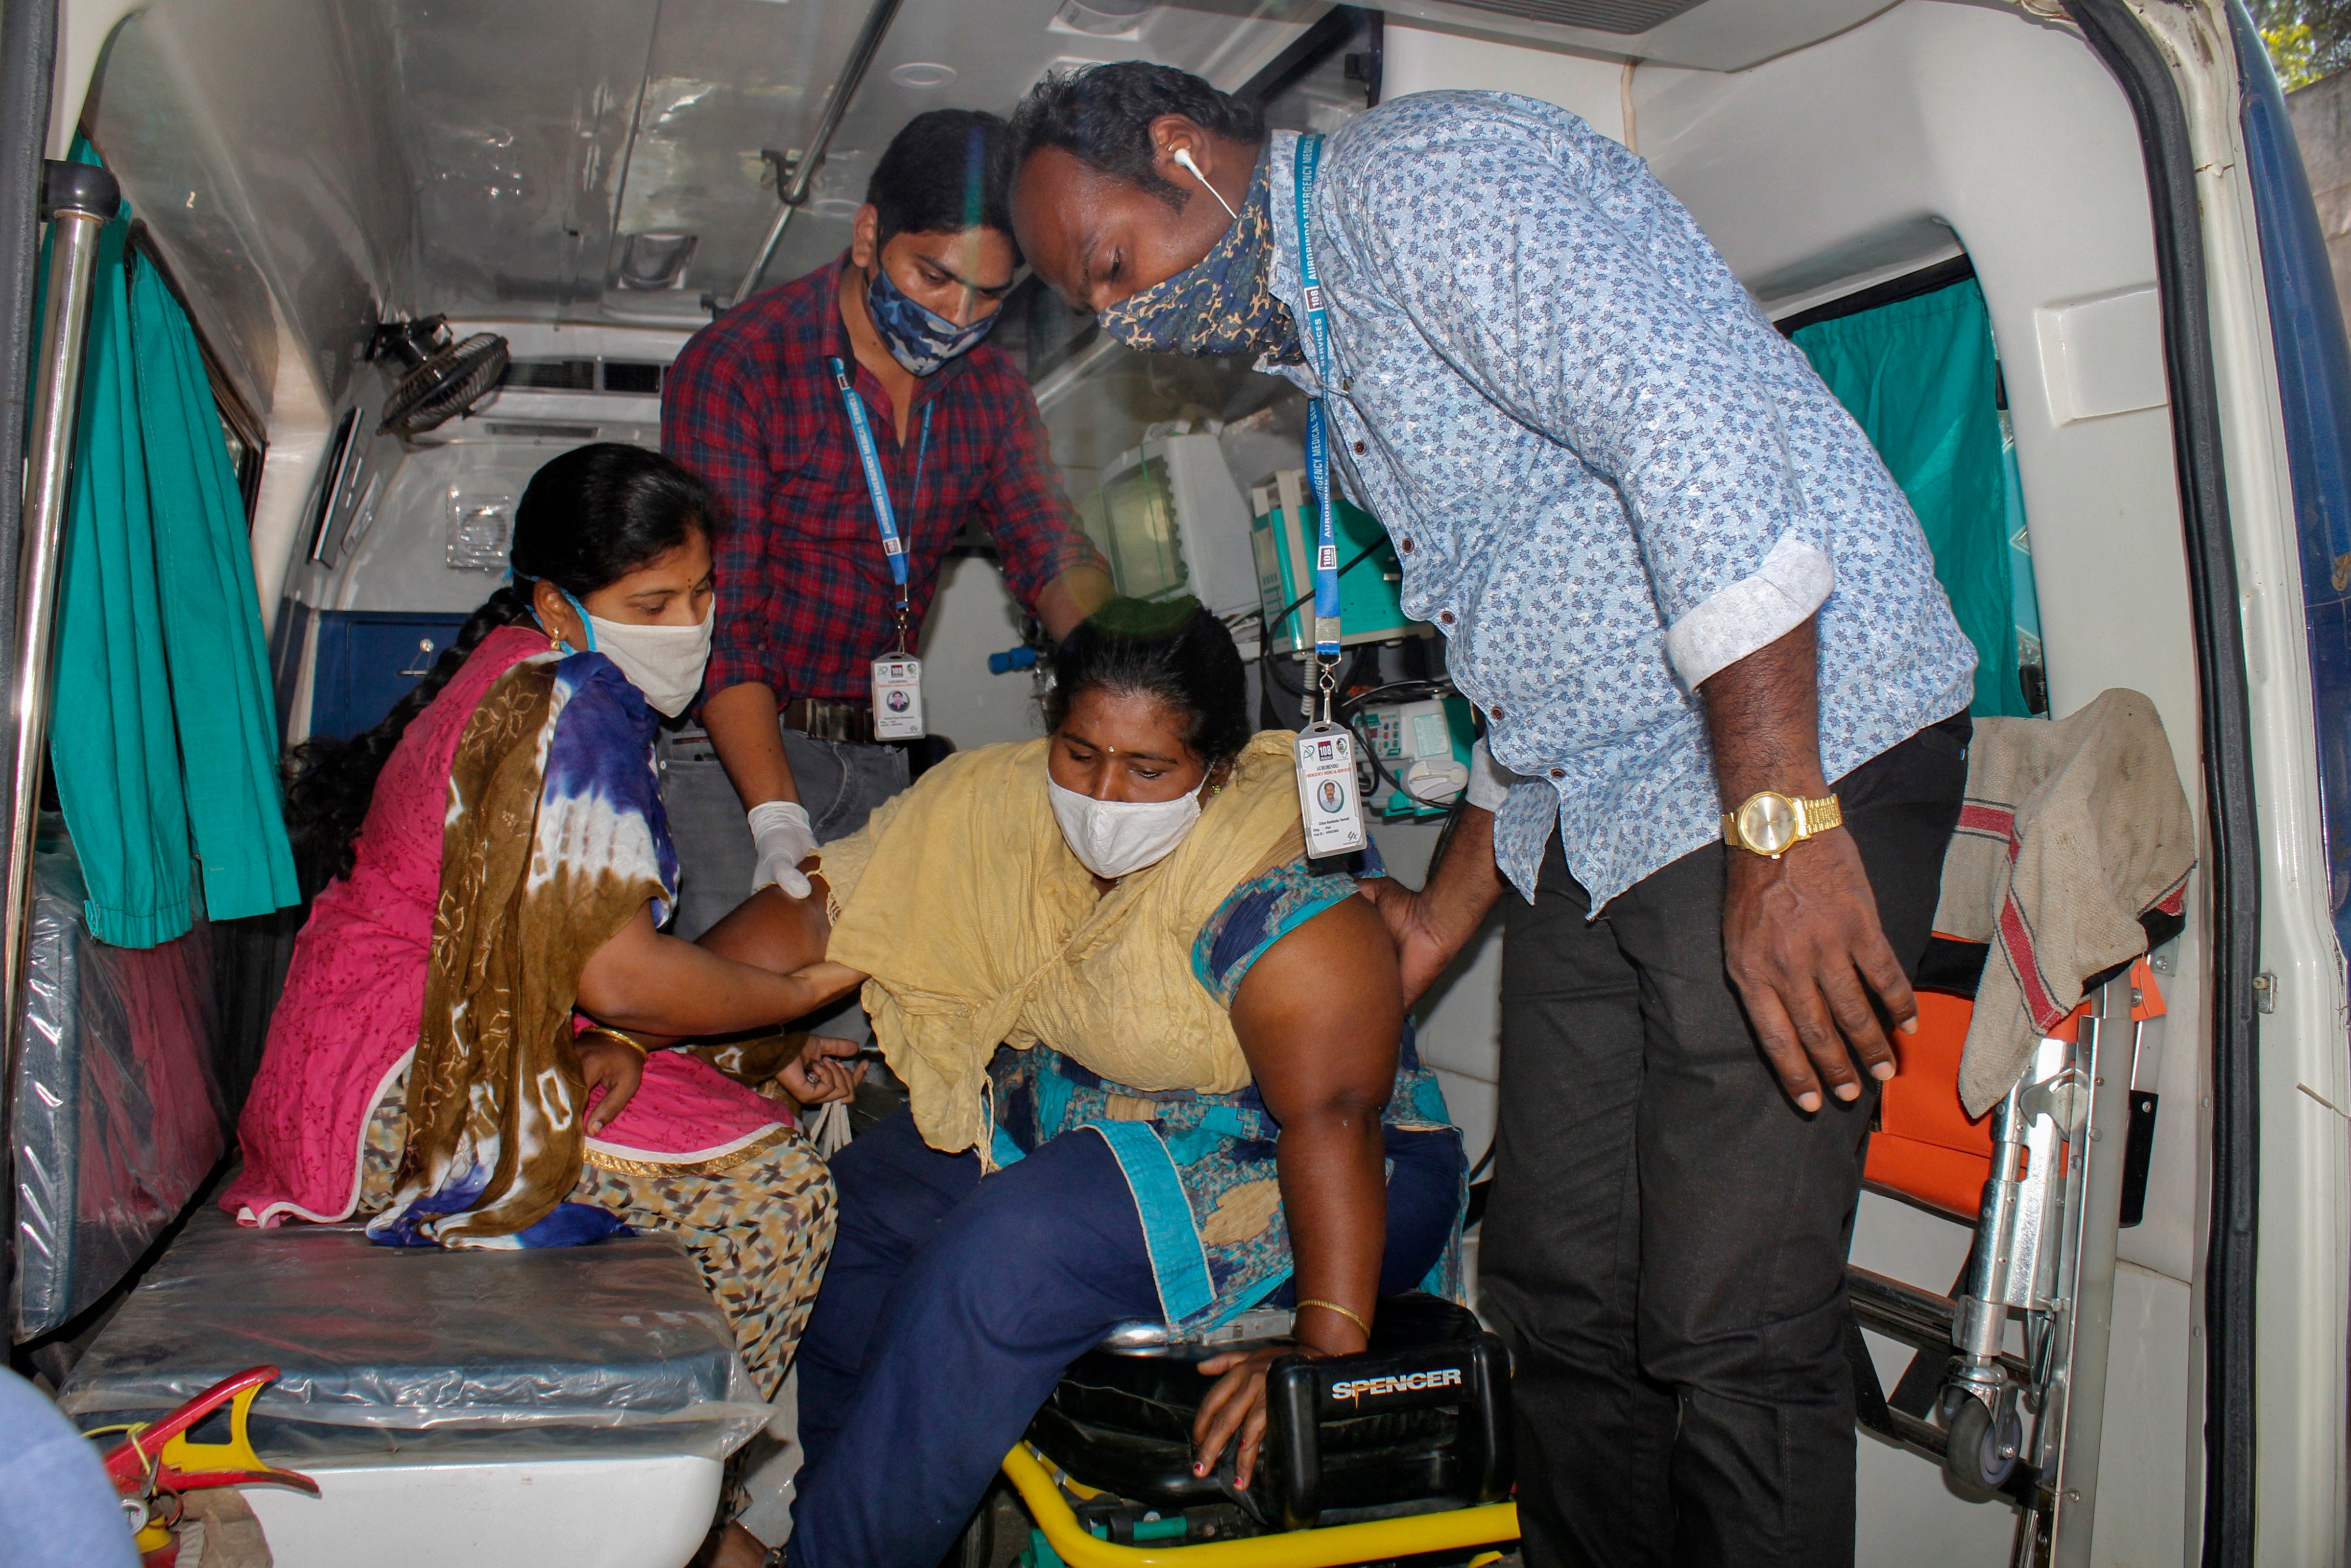 A patient is assisted by others to get down from an ambulance at the district government hospital in Eluru, Andhra Pradesh state, India, Tuesday, Dec. 8, 2020. Health officials and experts are still baffled by a mysterious illness that has left over 500 people hospitalized and one person dead in this southern Indian state. (AP)